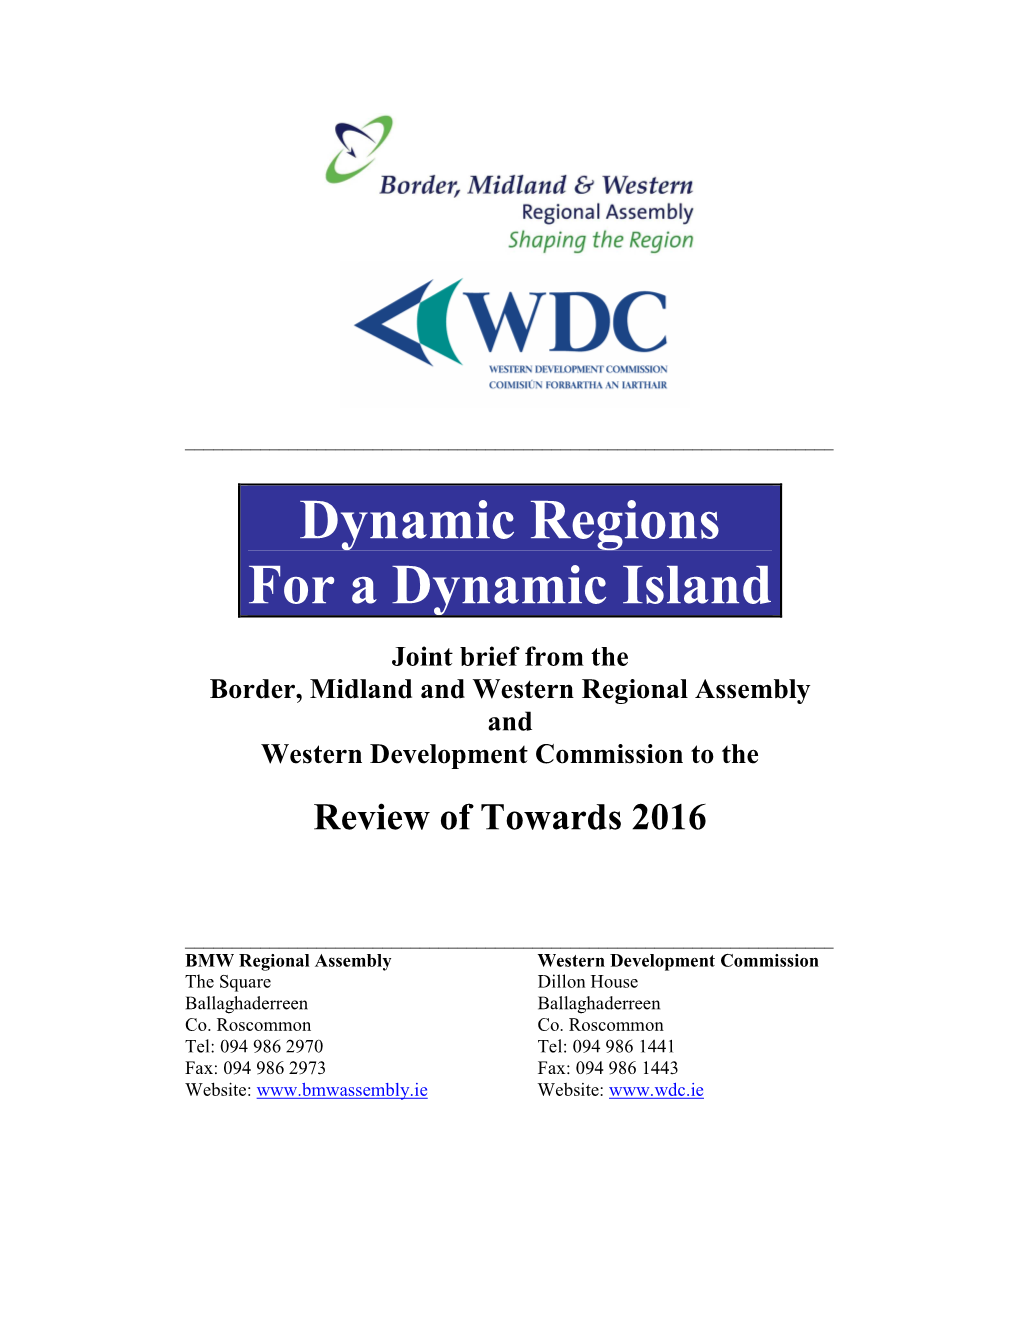 Briefing Note for Review of Towards 2016-Wdcandbmw